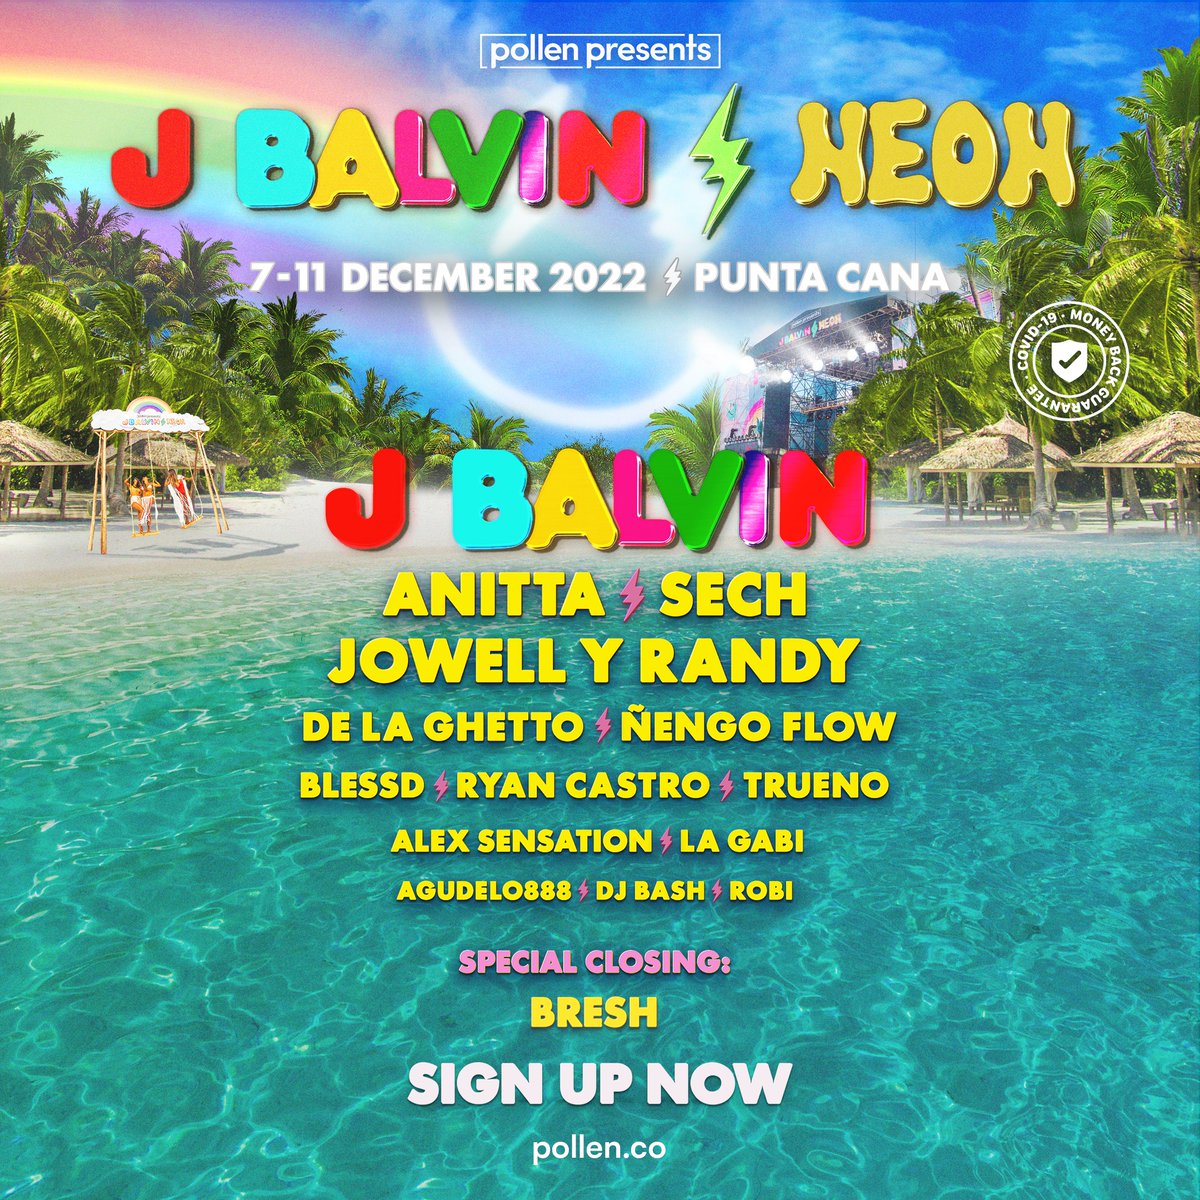 Announcing the Phase 1 lineup for J Balvin NEON Punta Cana. Join #pollenpresents and @jbalvin for NEON’s legendary return to the Dominican Republic with performances from @Anitta, Sech, Jowell y Randy, @DeLaGhettoReal, @NengoFlow, and more. Sign up here: plln.io/jbalvin-puntac…